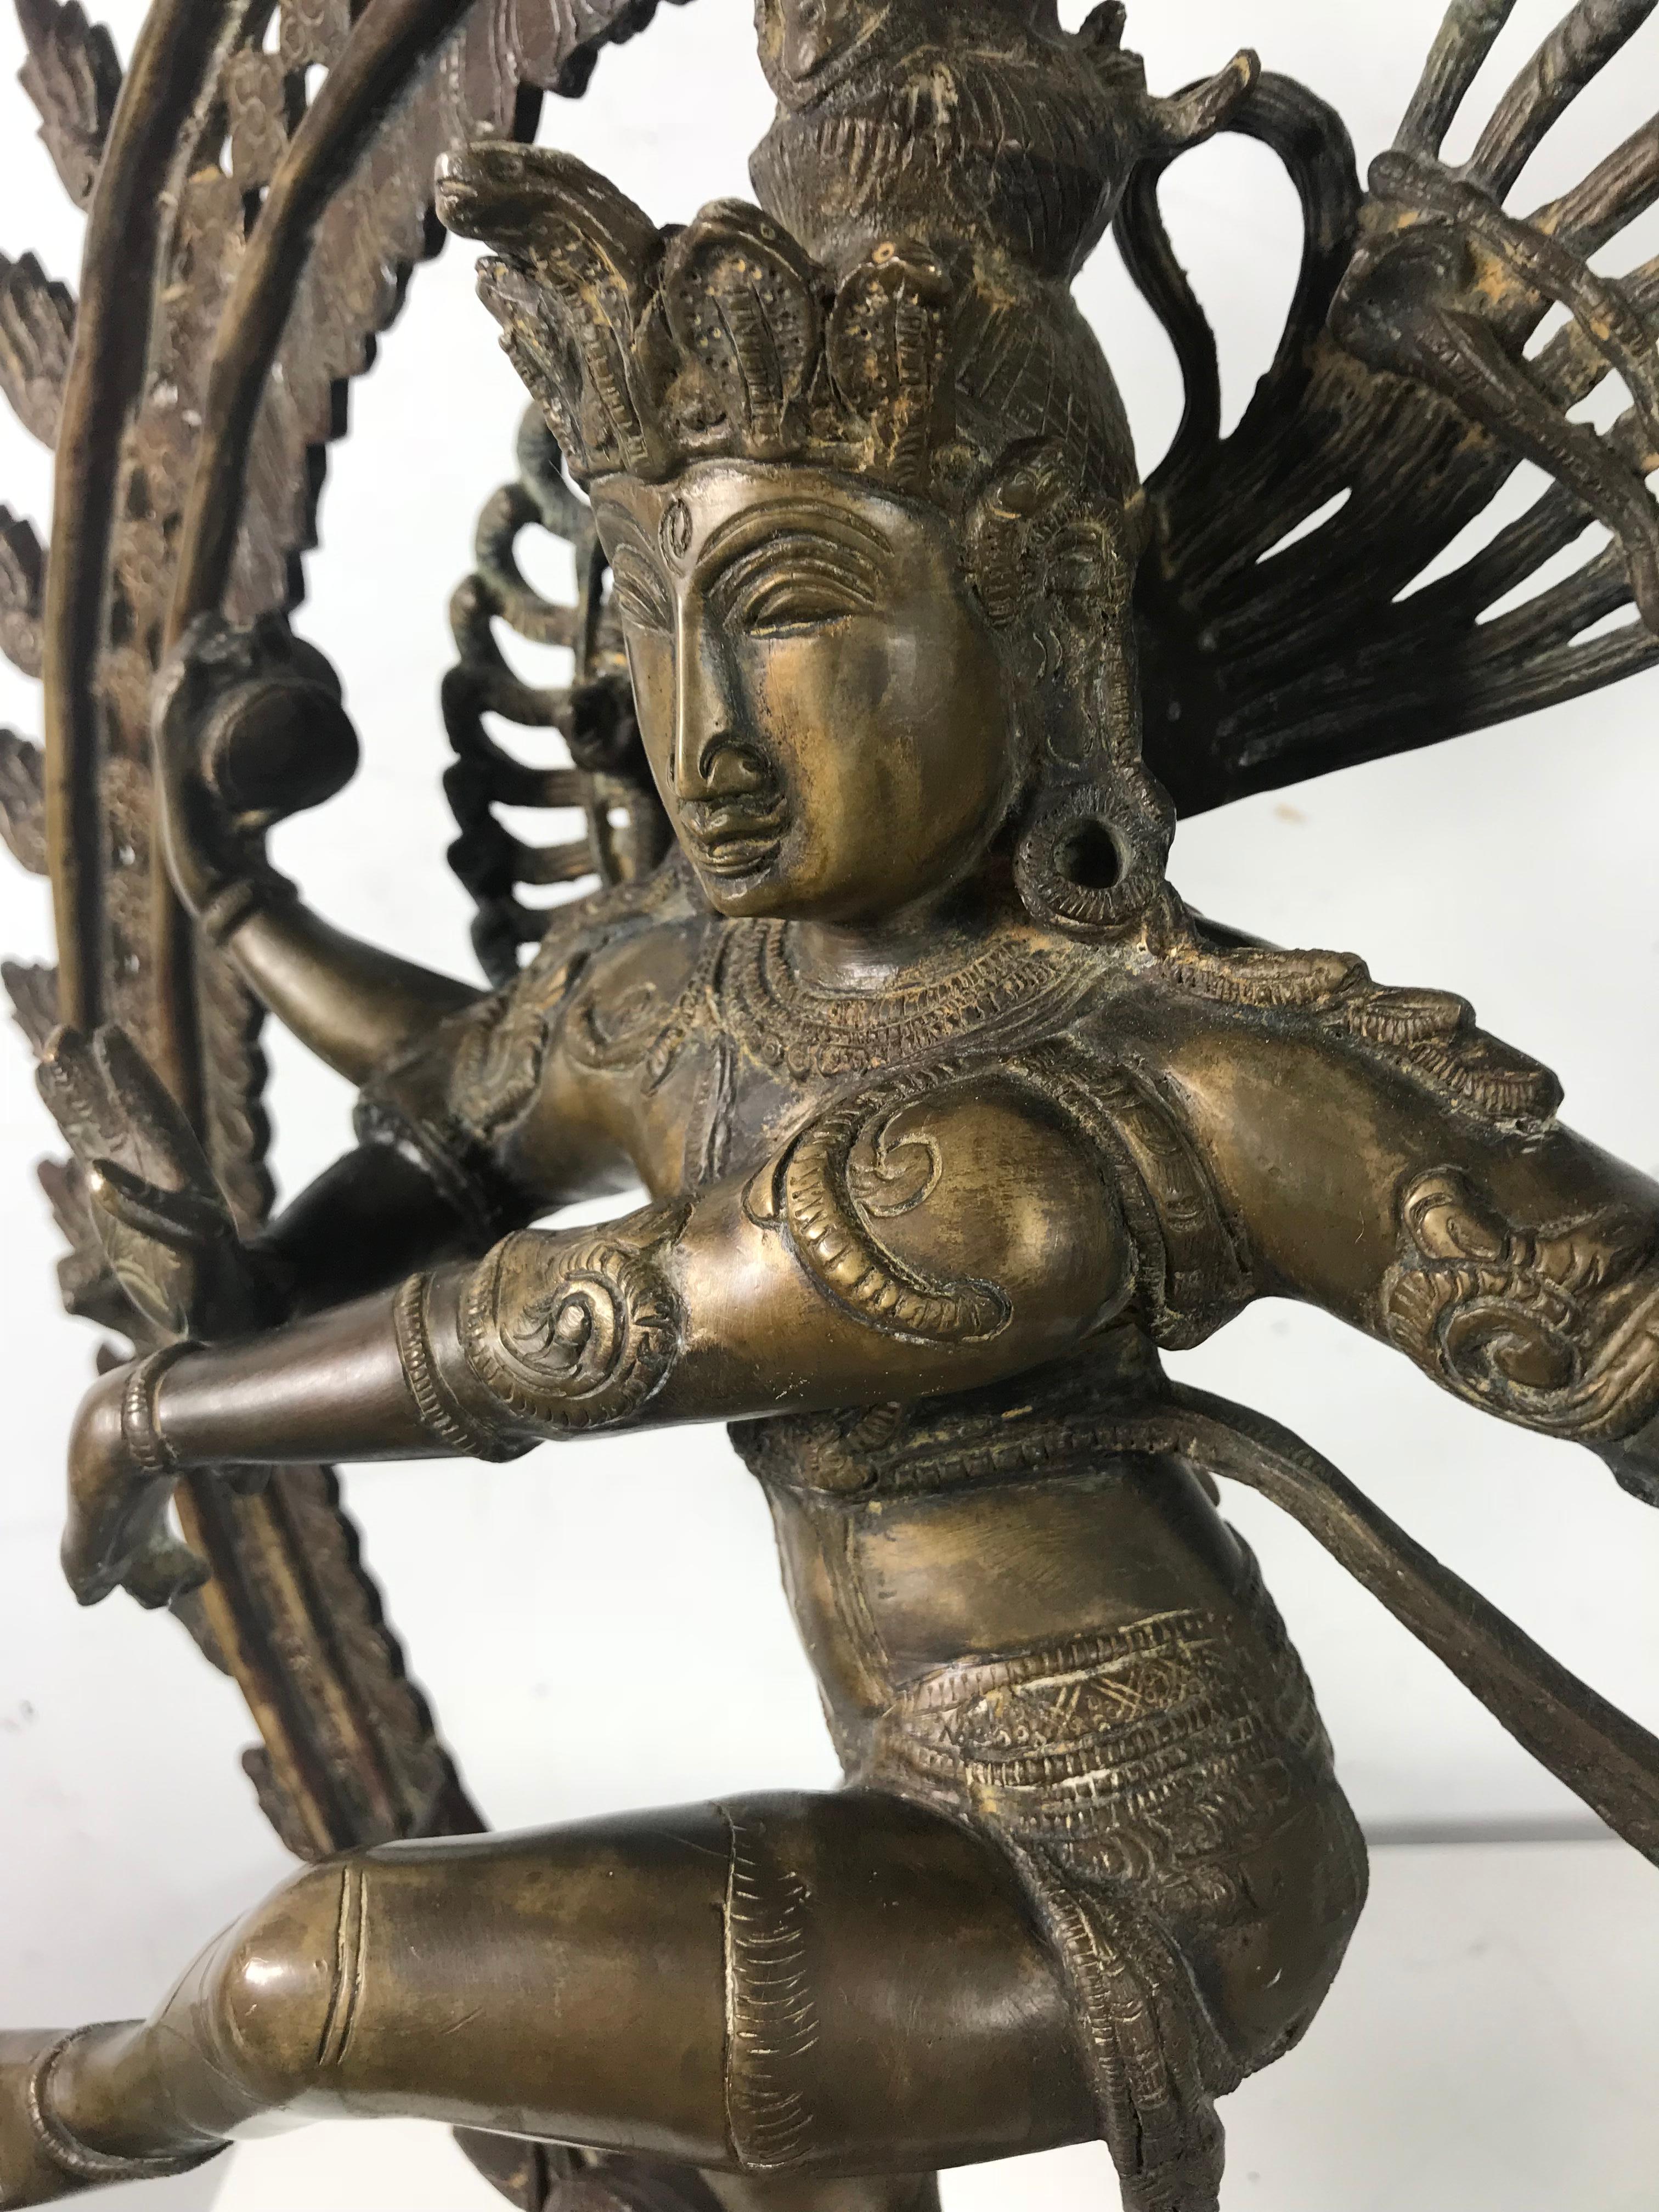 Shiva the Hindu god of destruction is also known as Nataraja, the Lord of Dancers (In Sanskrit Nata means dance and raja means Lord). The visual image of Nataraja achieved canonical form in the bronzes cast under the Chola dynasty in the tenth